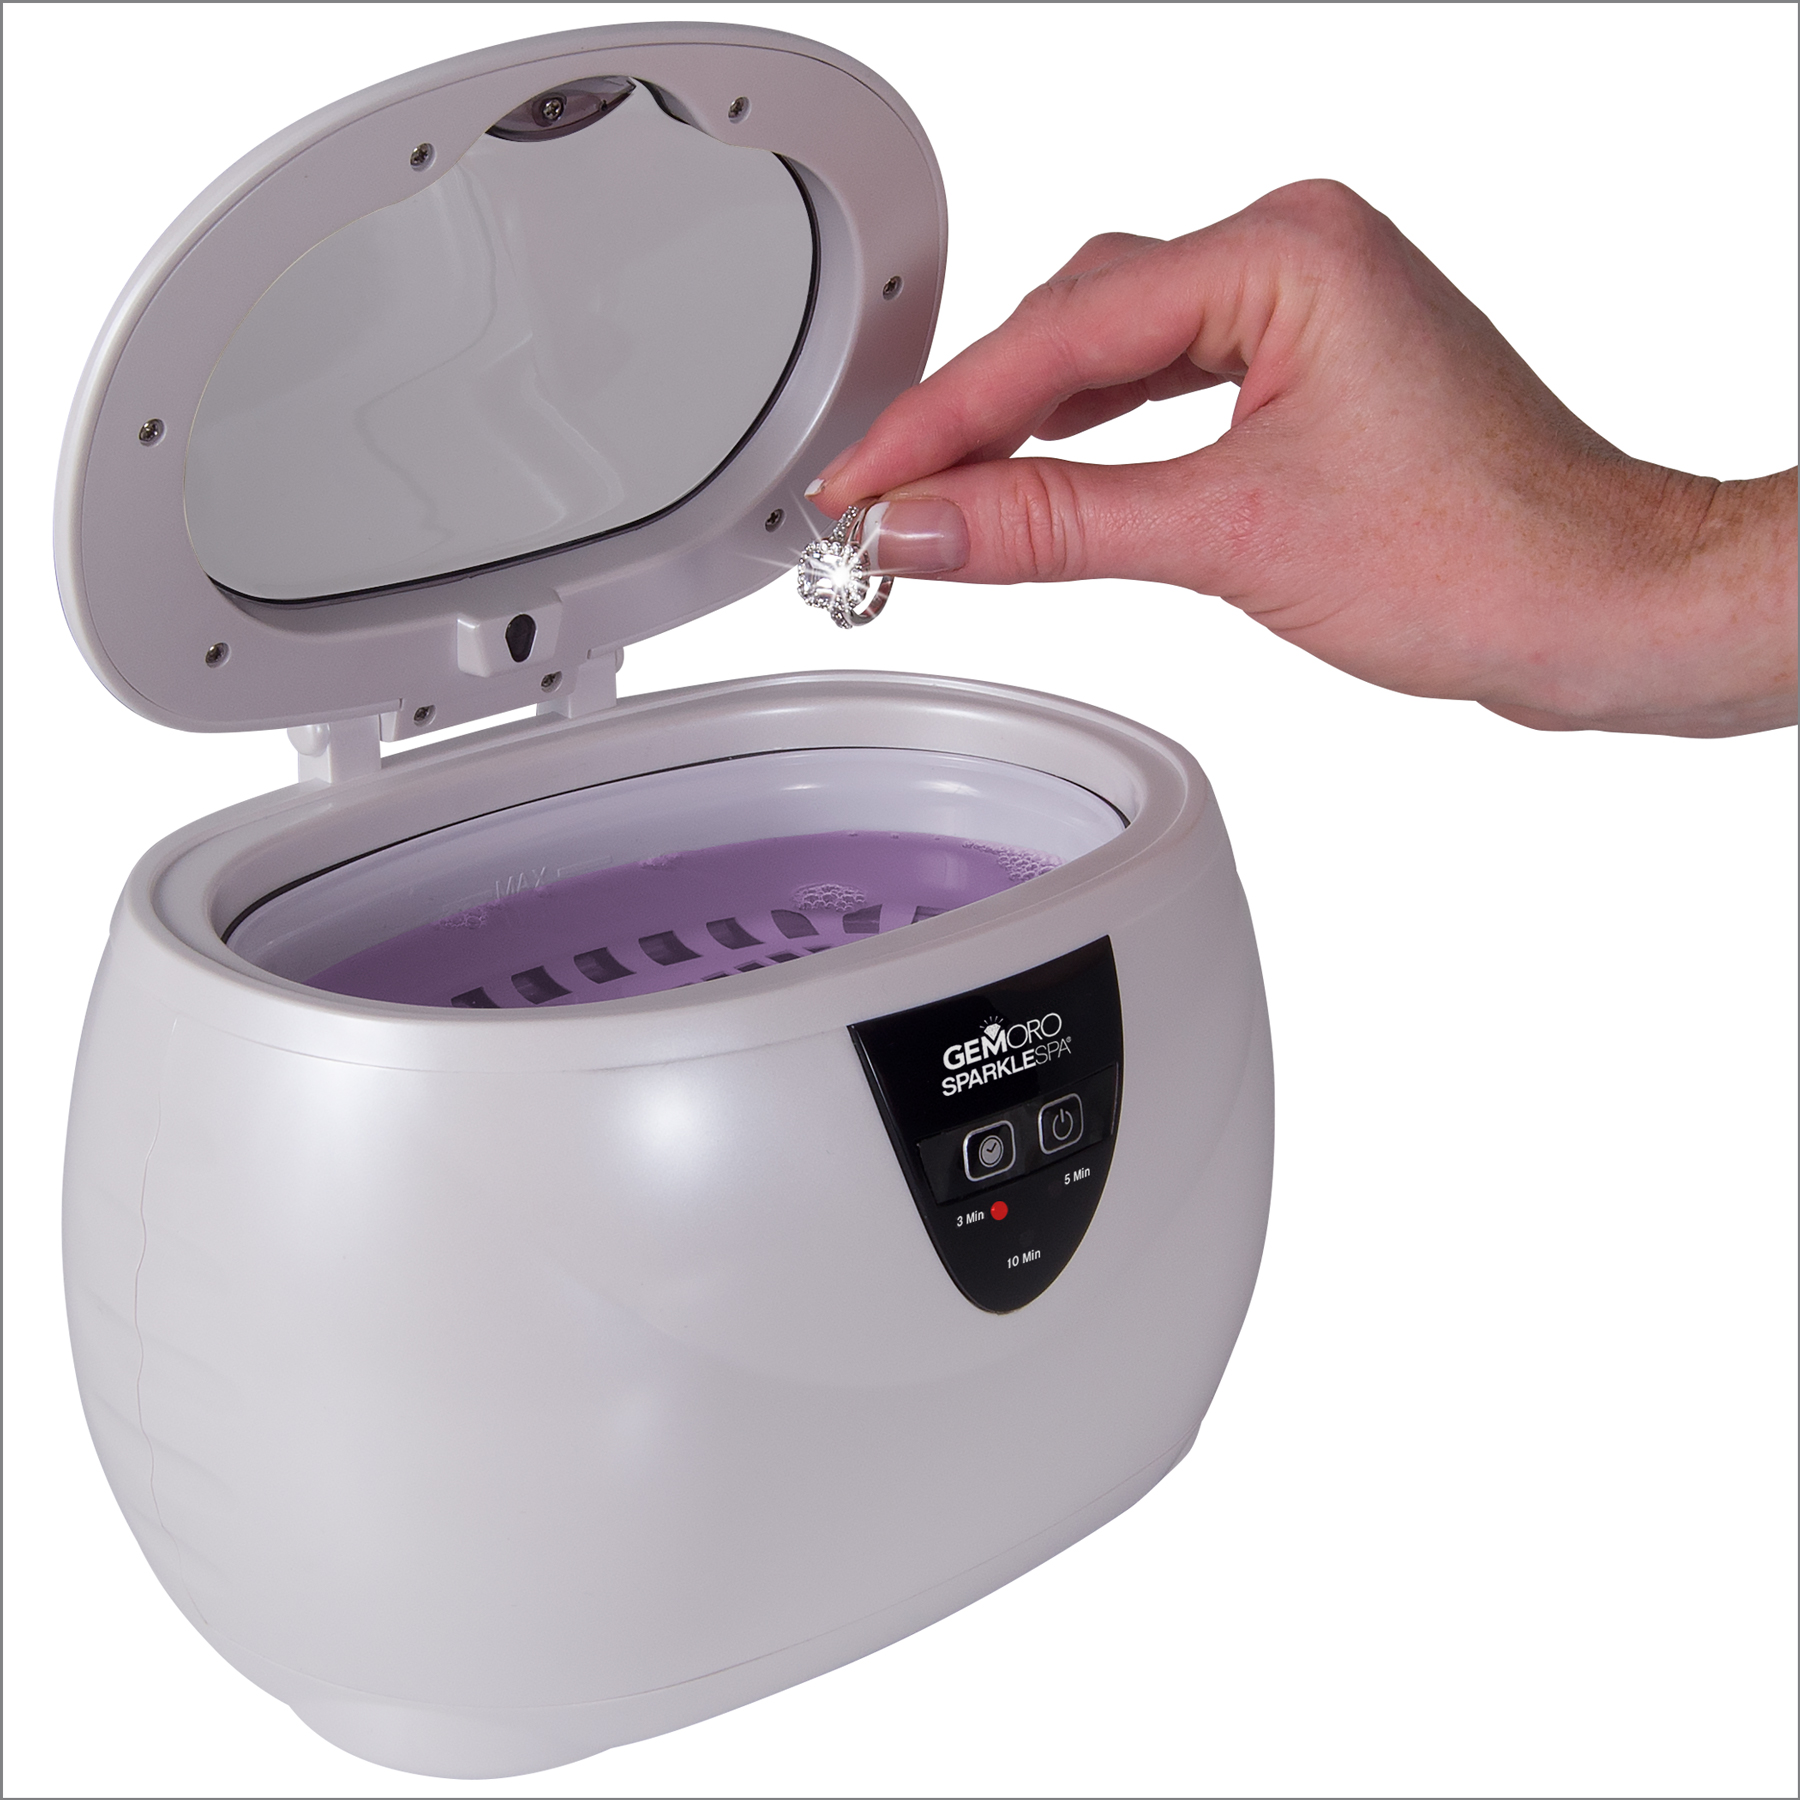 A Sparkle Spa jewelry cleaning unit